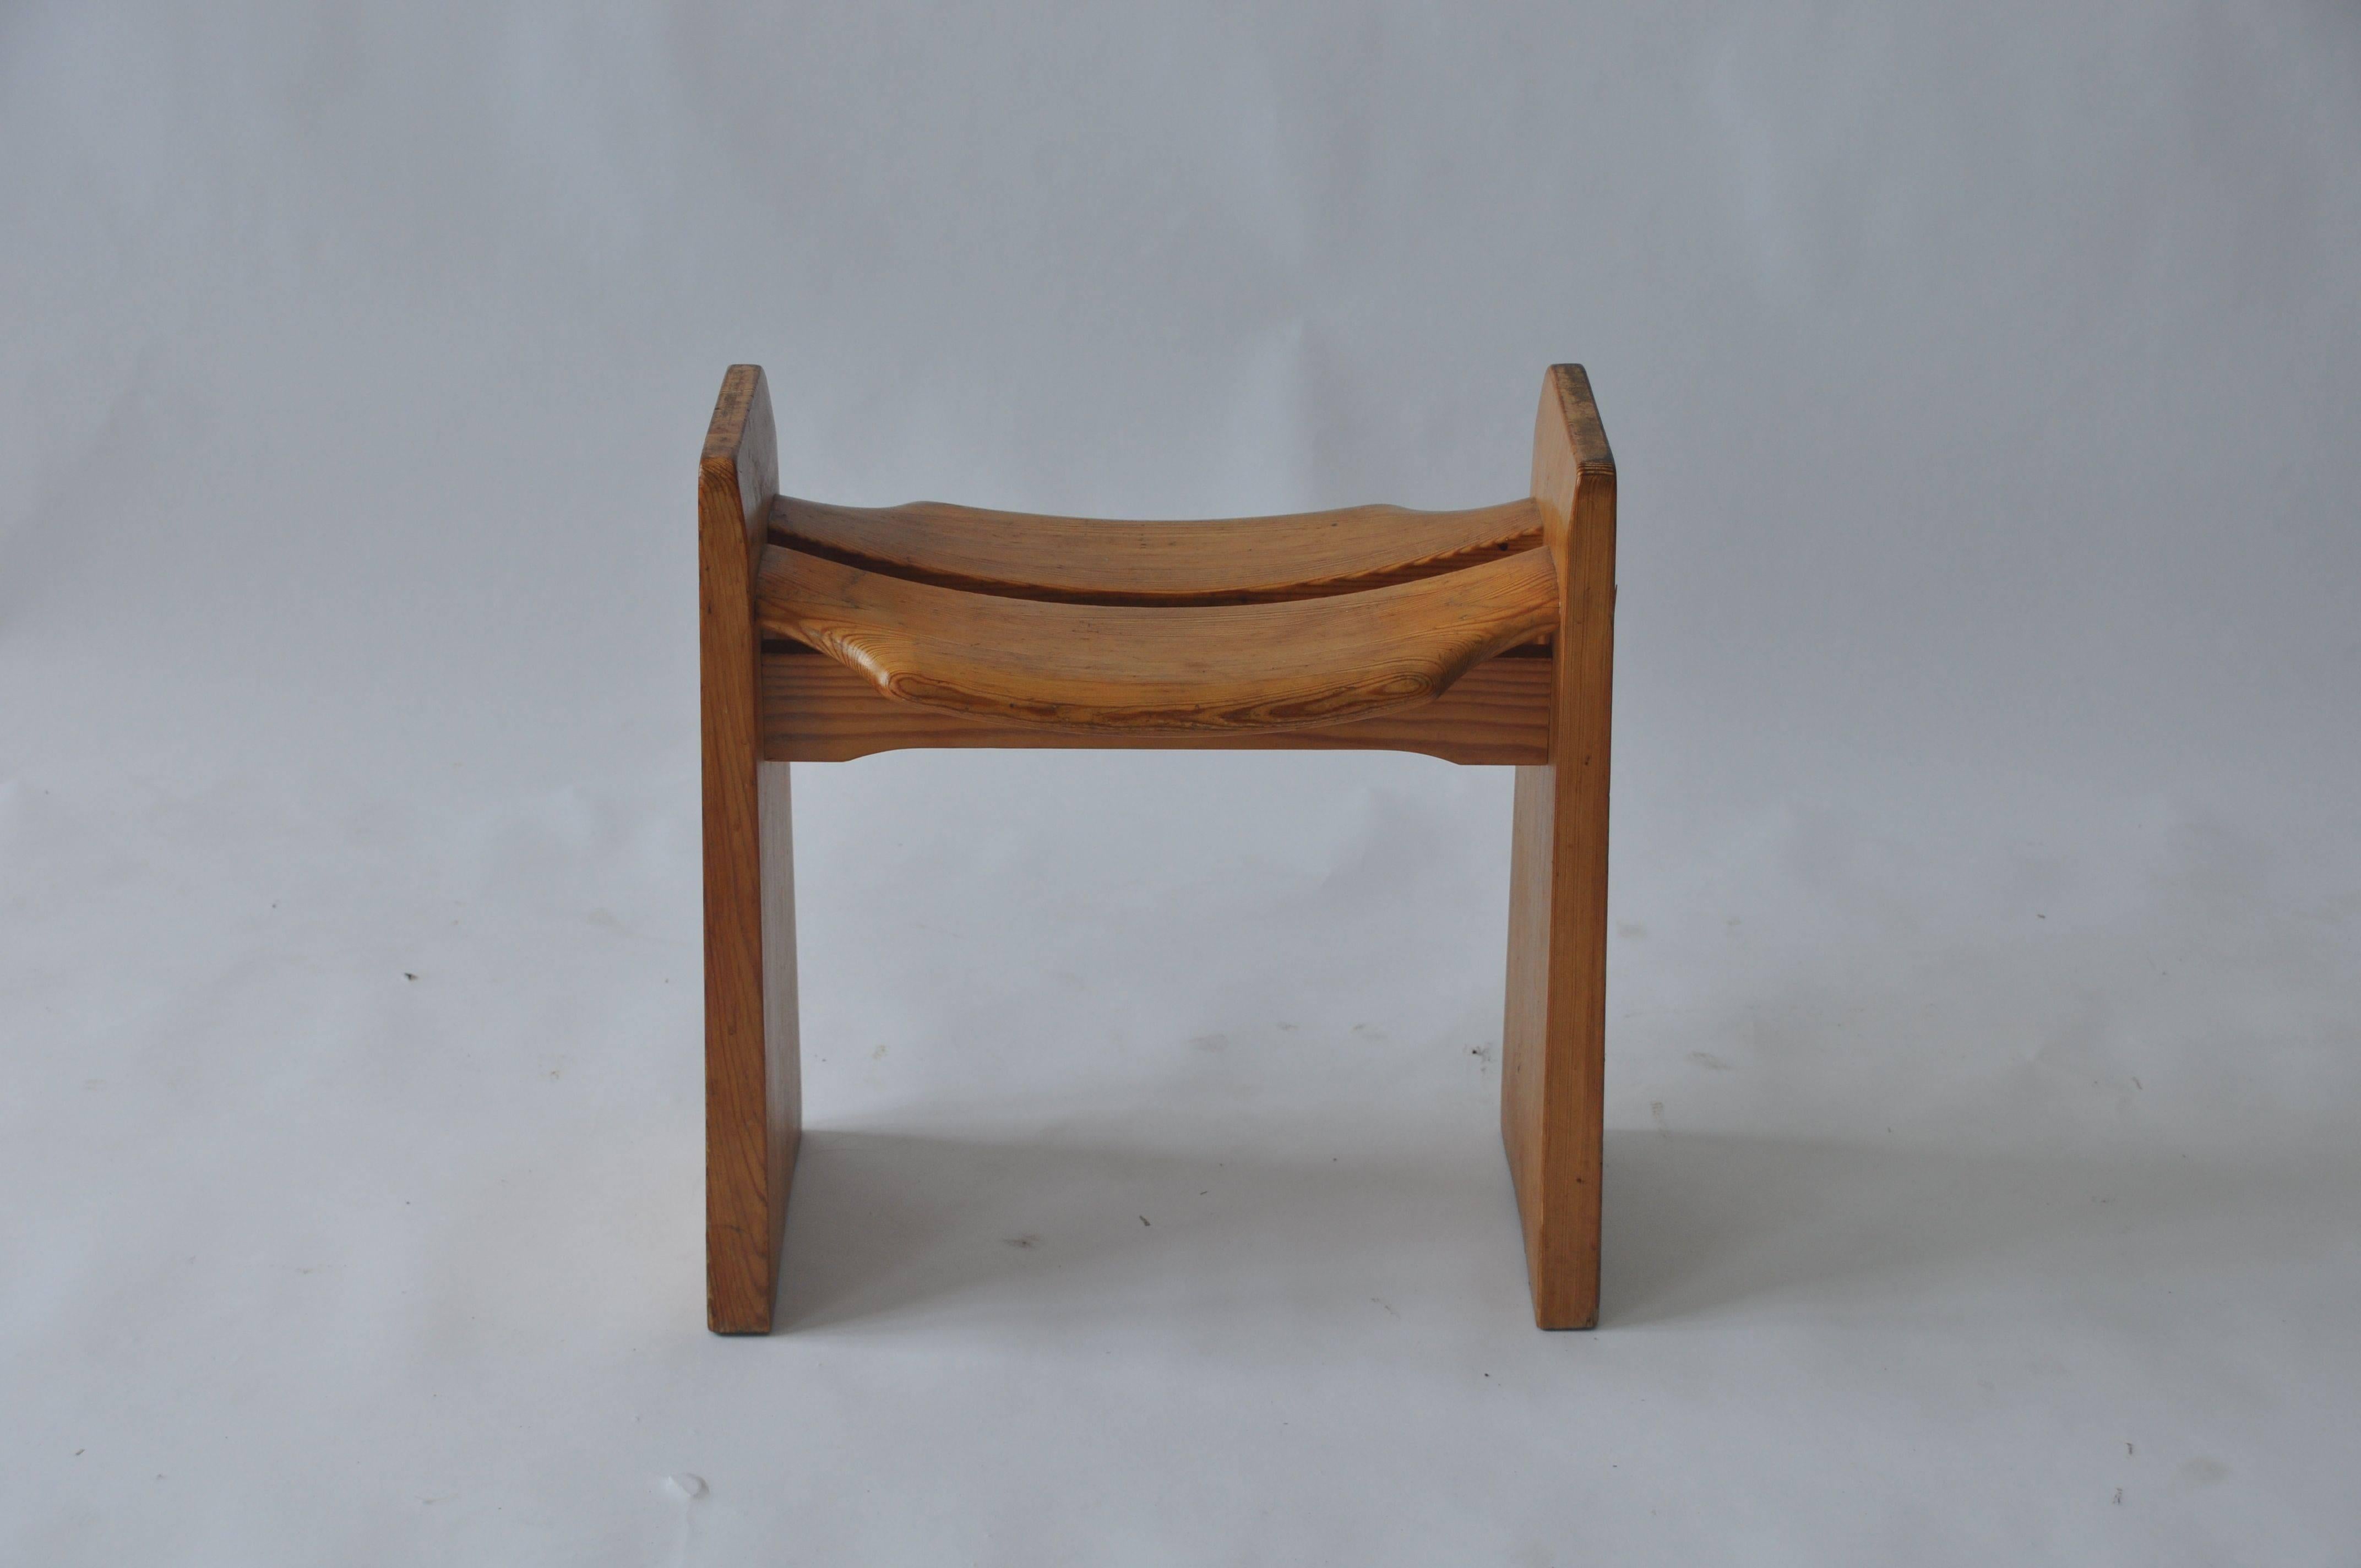 Solid pine stool by Gilbert Marklund, circa 1950s. Manufactured by Furusnickarn AB. Made in Sweden.